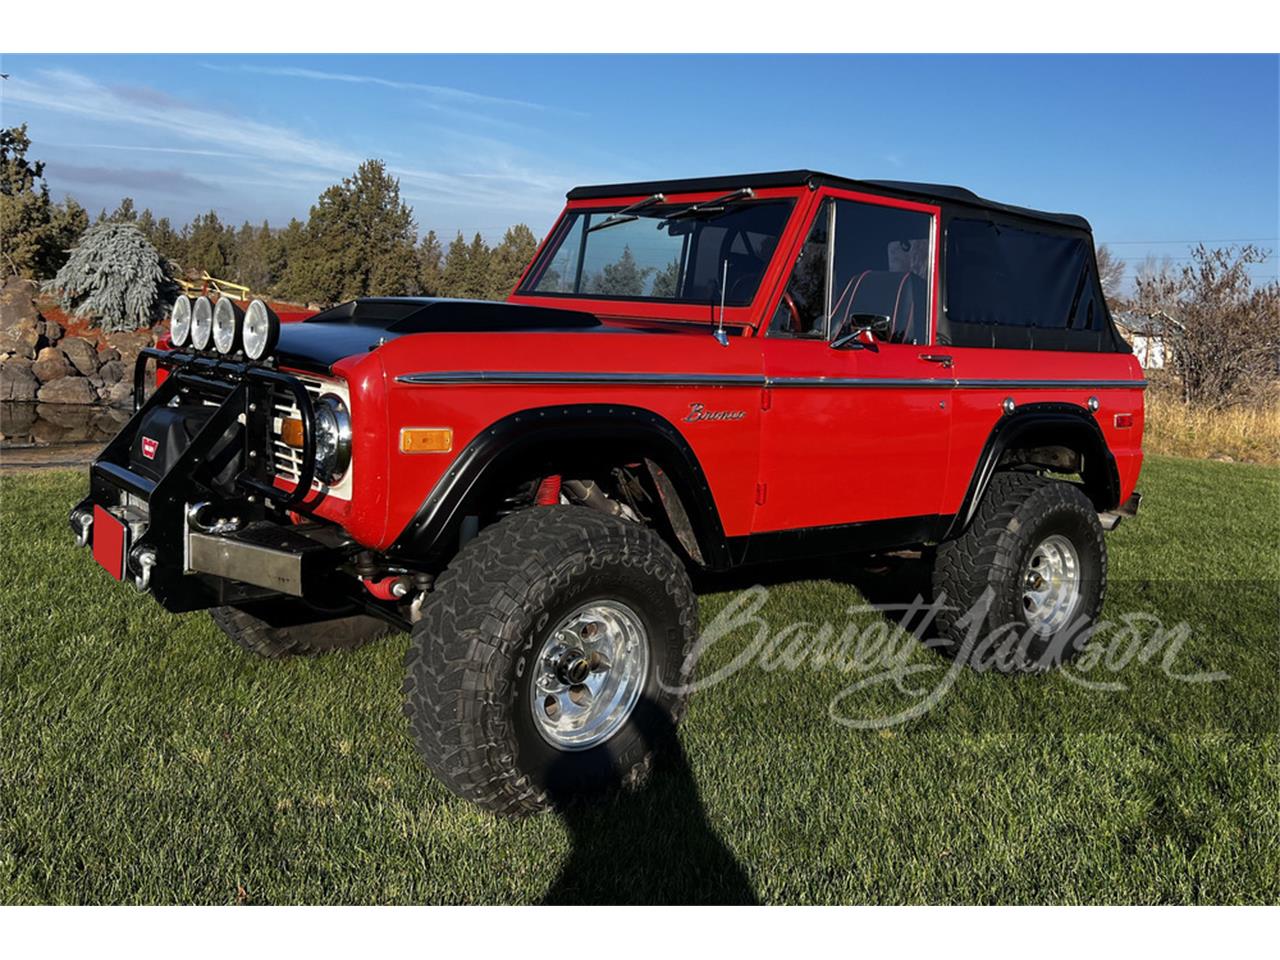 For Sale at Auction: 1974 Ford Bronco in Scottsdale, Arizona for sale in Scottsdale, AZ